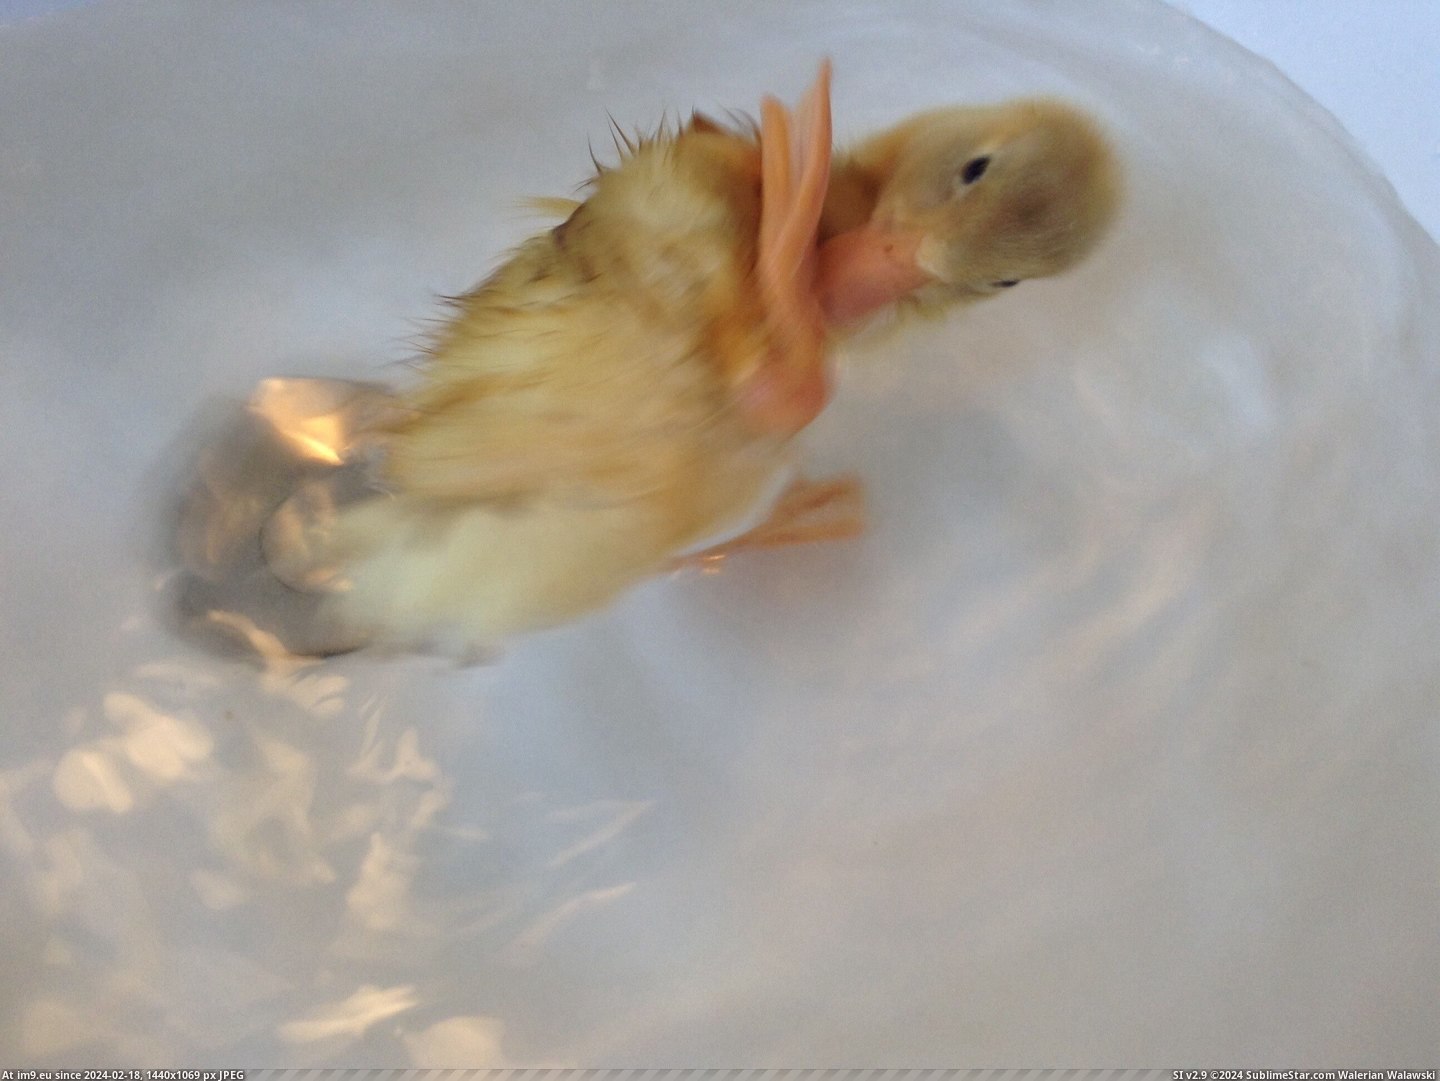 #Baby #Duck #Popularity #Excited #Stanley [Aww] My baby duck Stanley was excited for all the popularity, so here are some more pictures! 3 Pic. (Image of album My r/AWW favs))